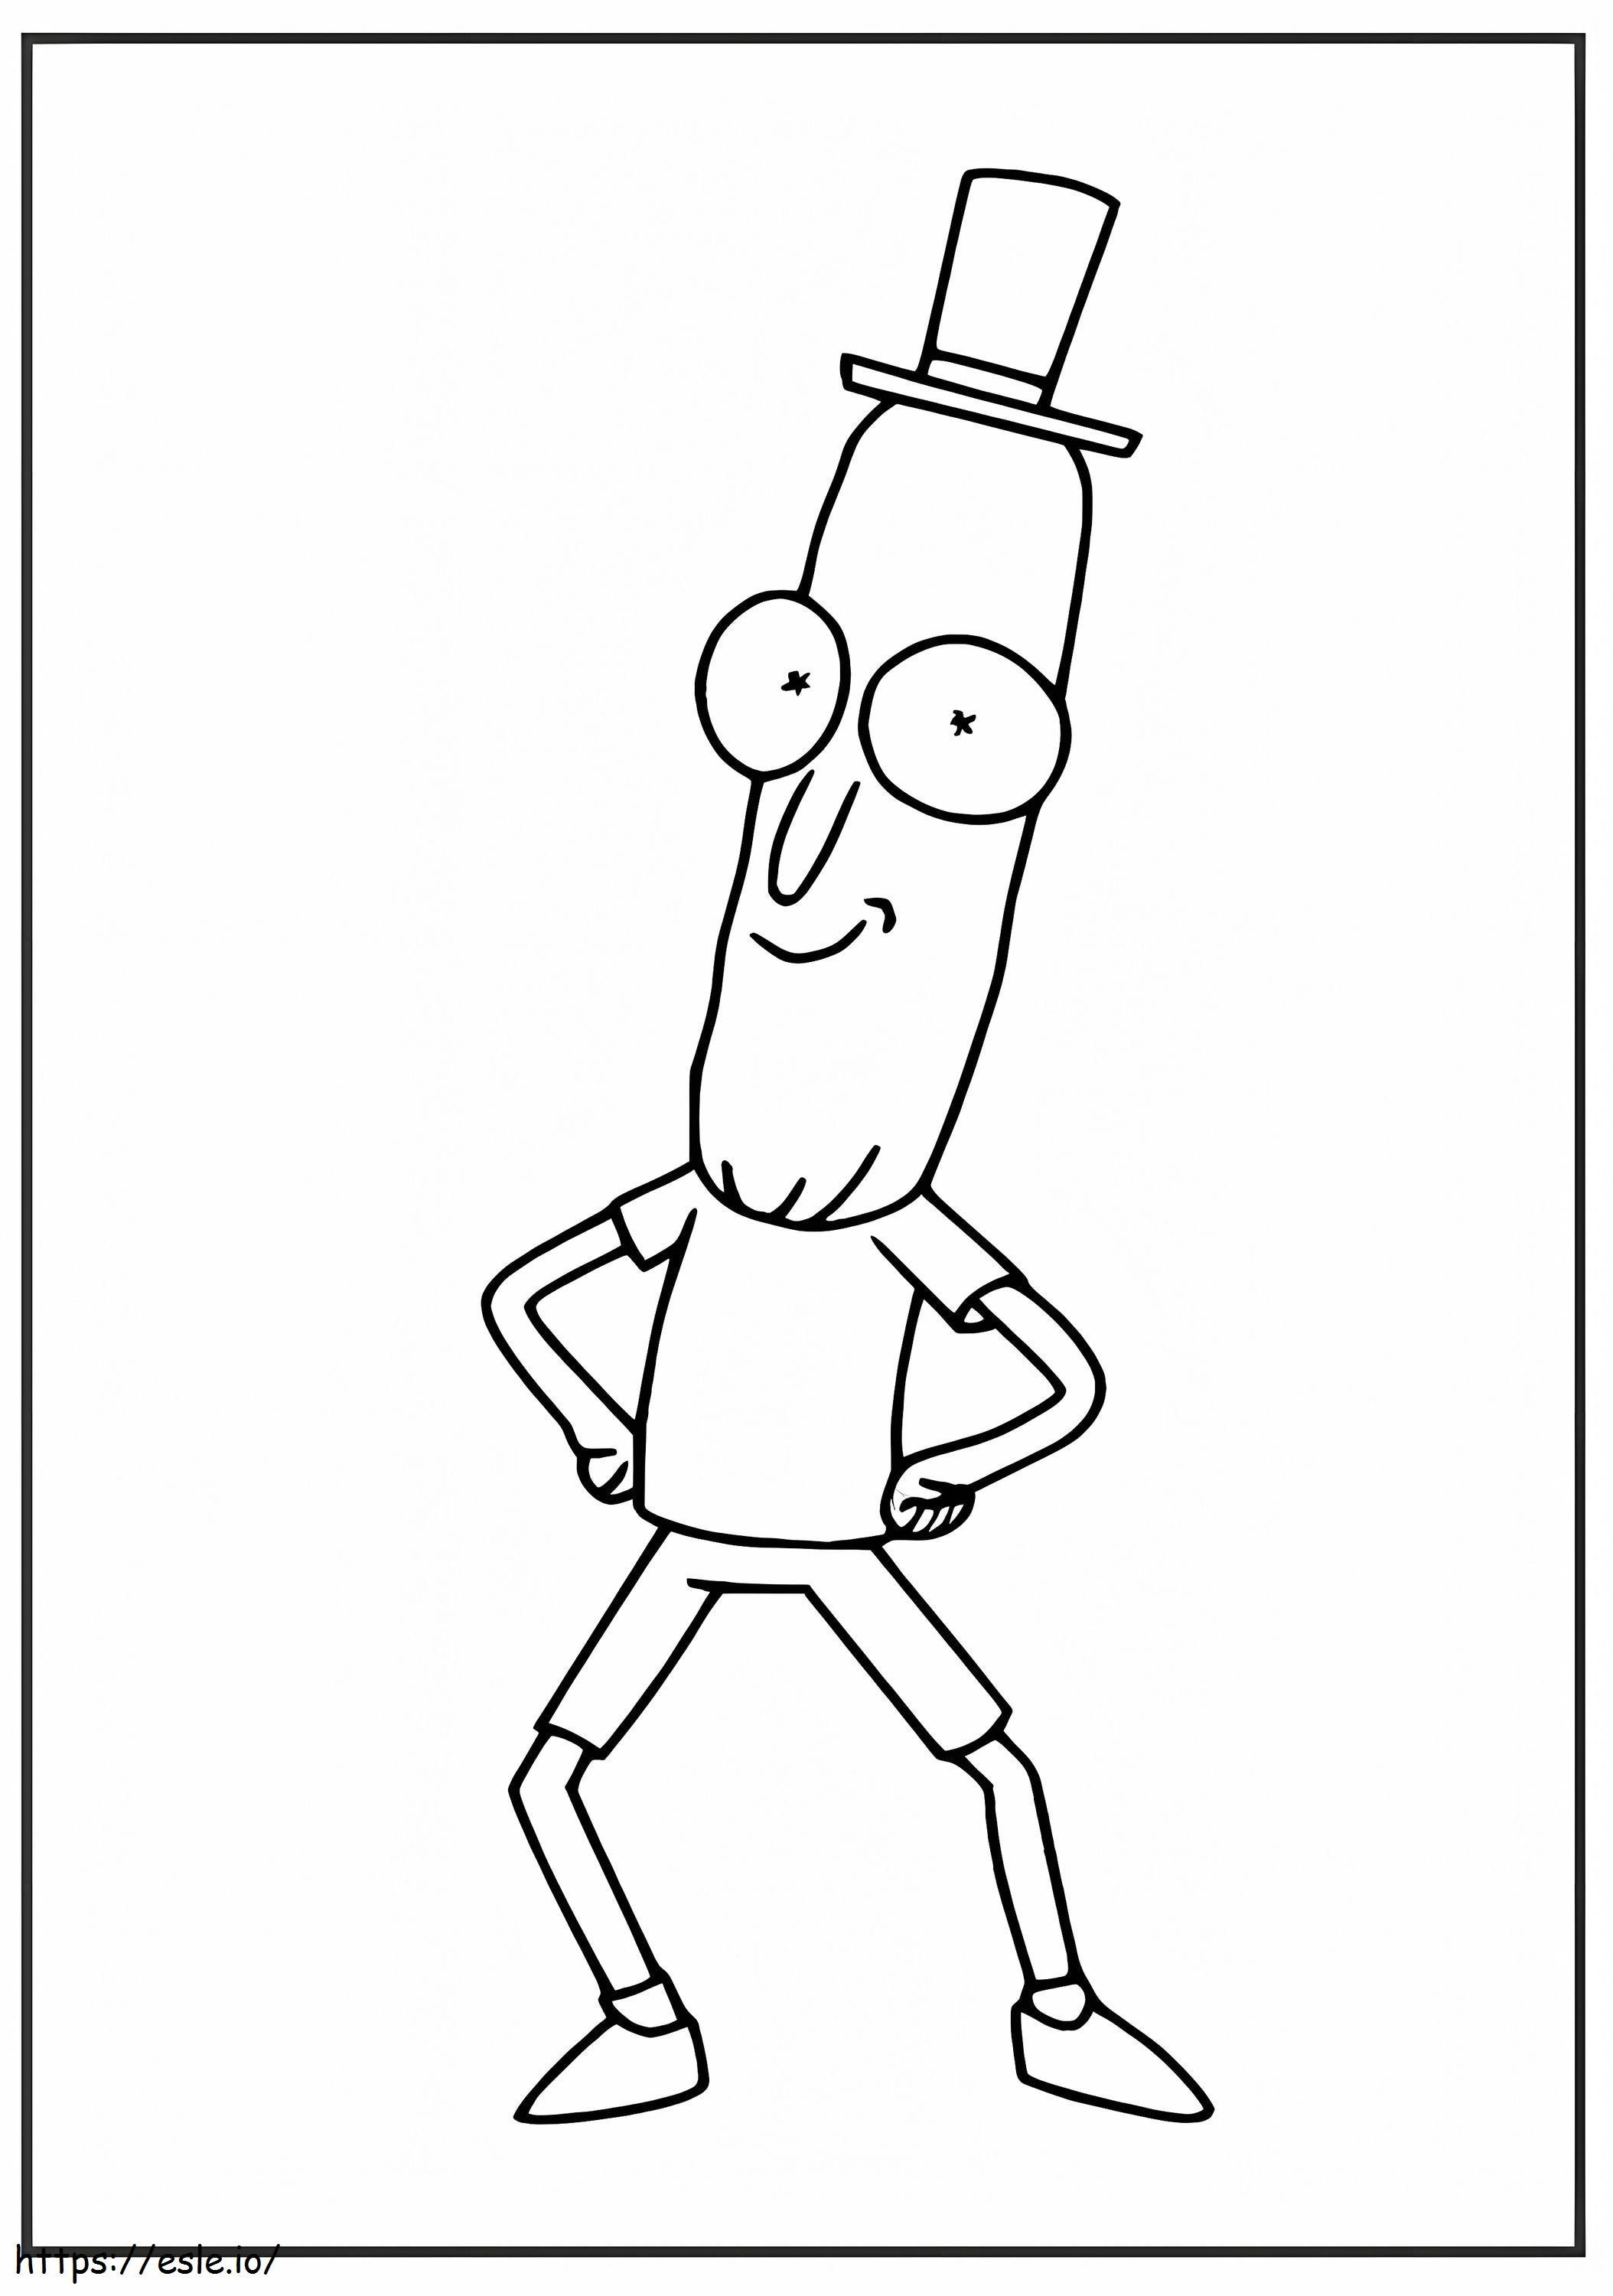 Mr. Poopybutthole coloring page